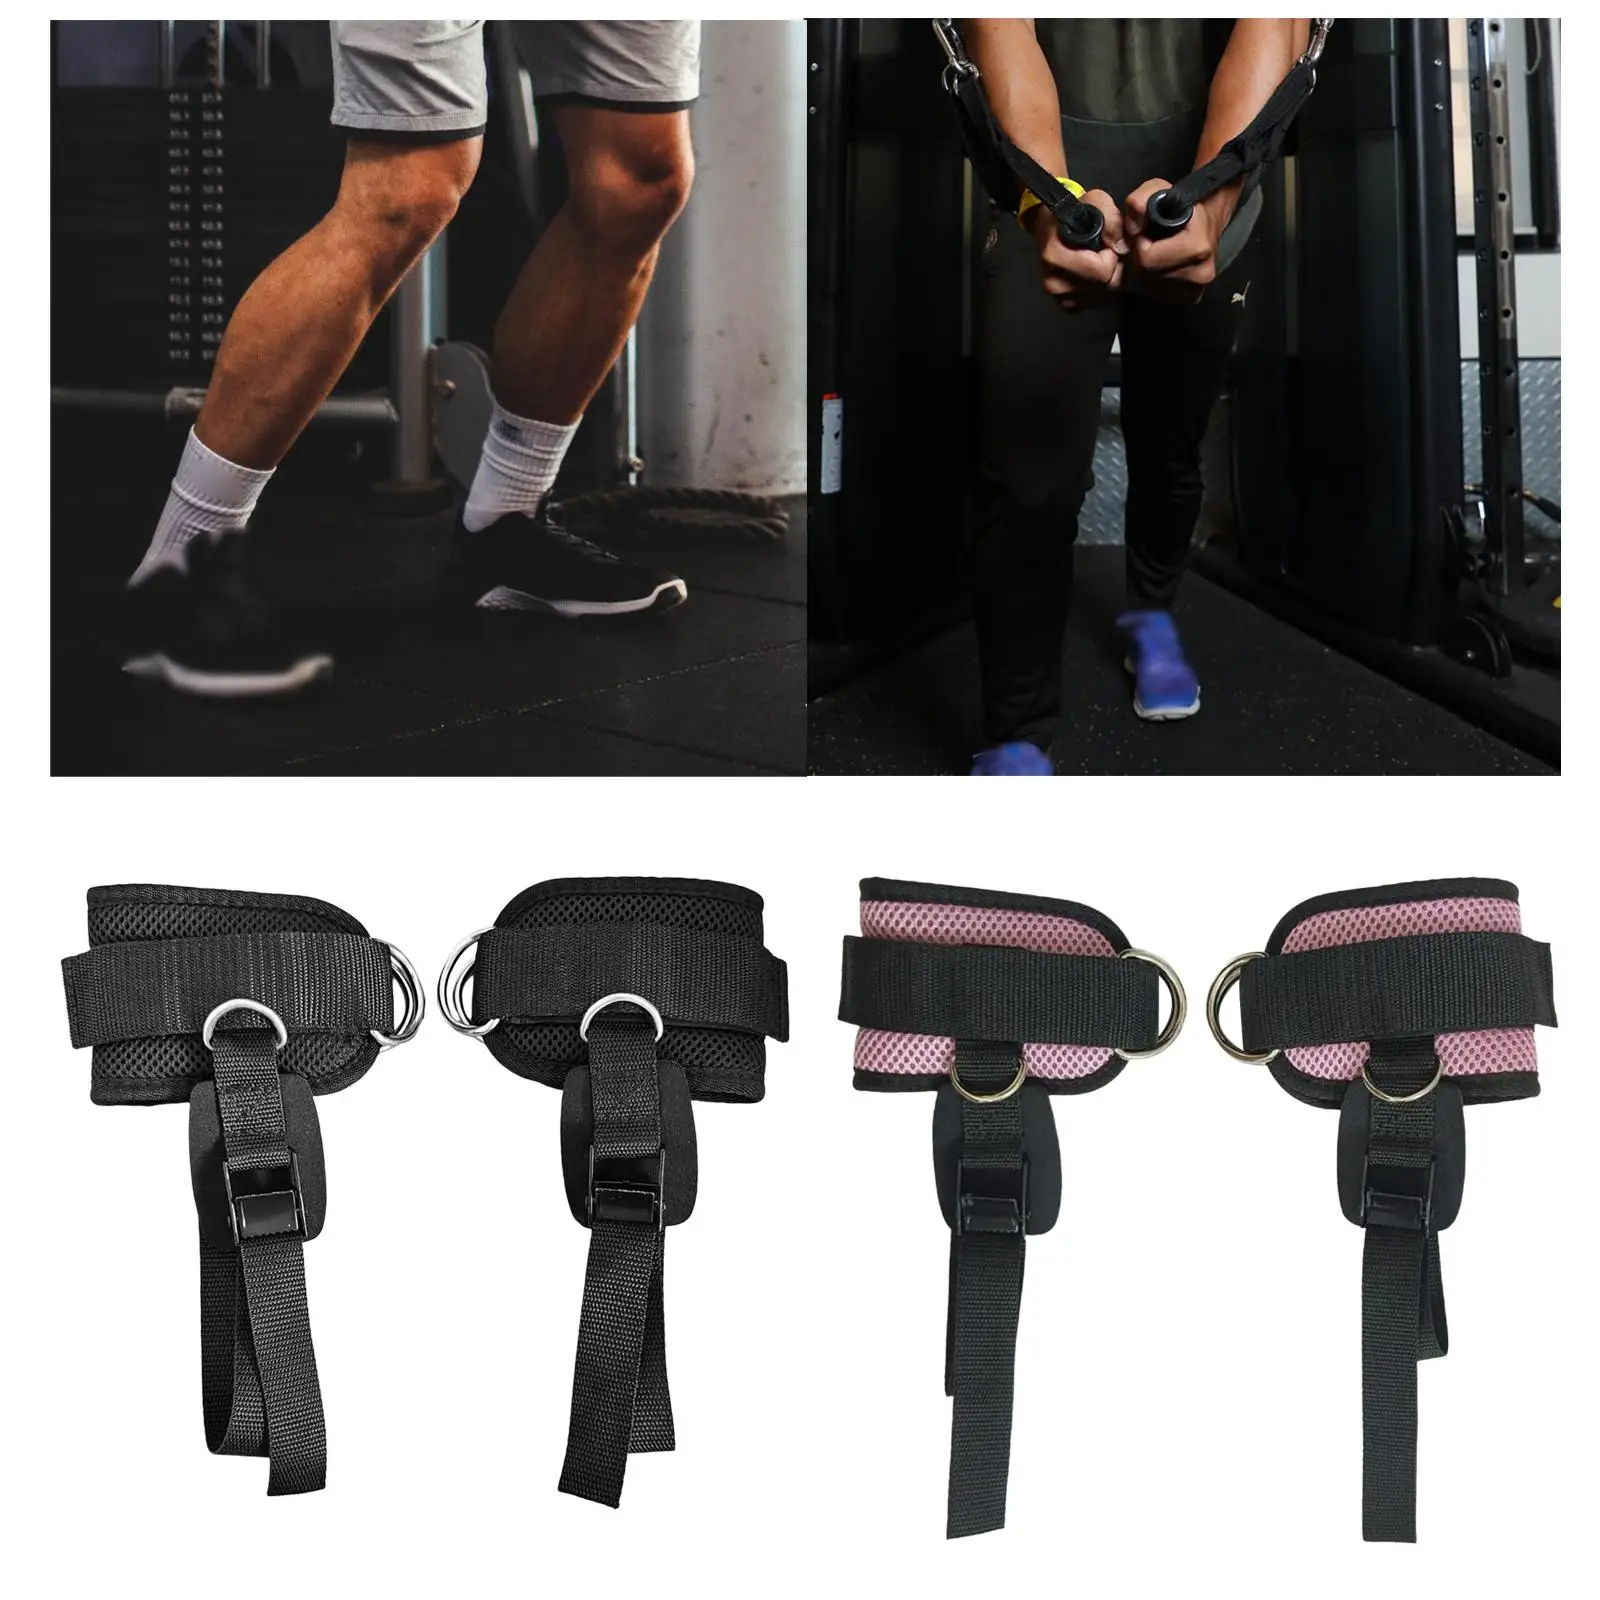 Ankle Straps Pedal Rope Leg Strength Training Glute Exercises Ankle Cuffs